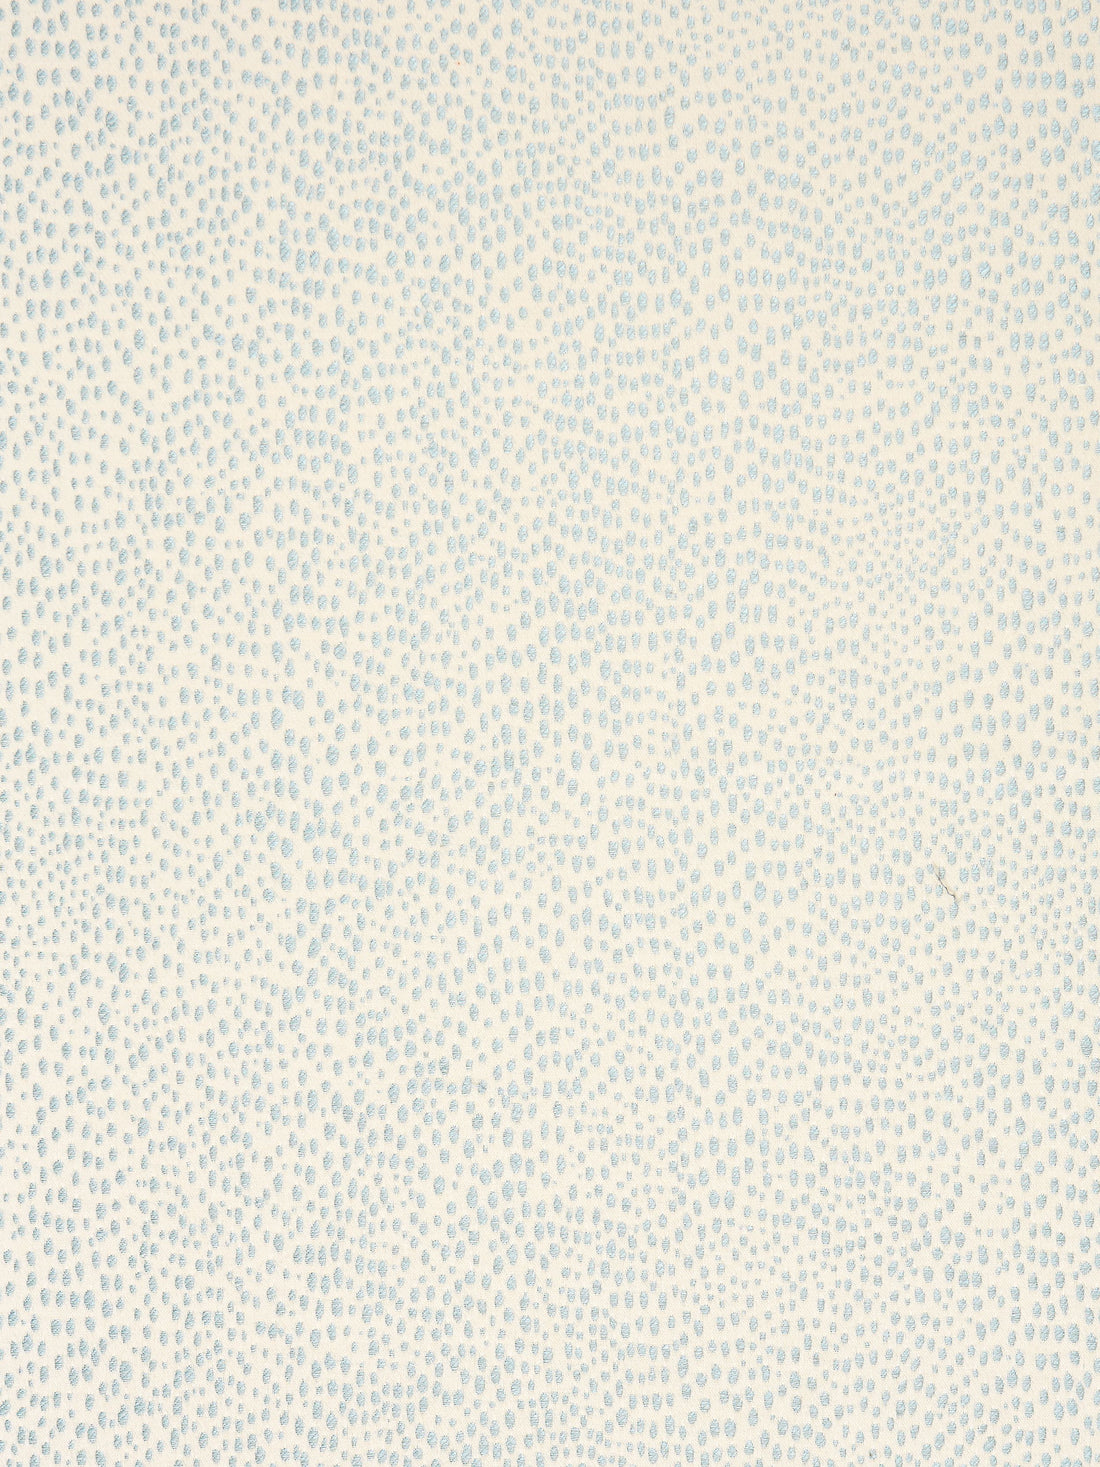 Raindrop fabric in mineral color - pattern number SC 000227019 - by Scalamandre in the Scalamandre Fabrics Book 1 collection